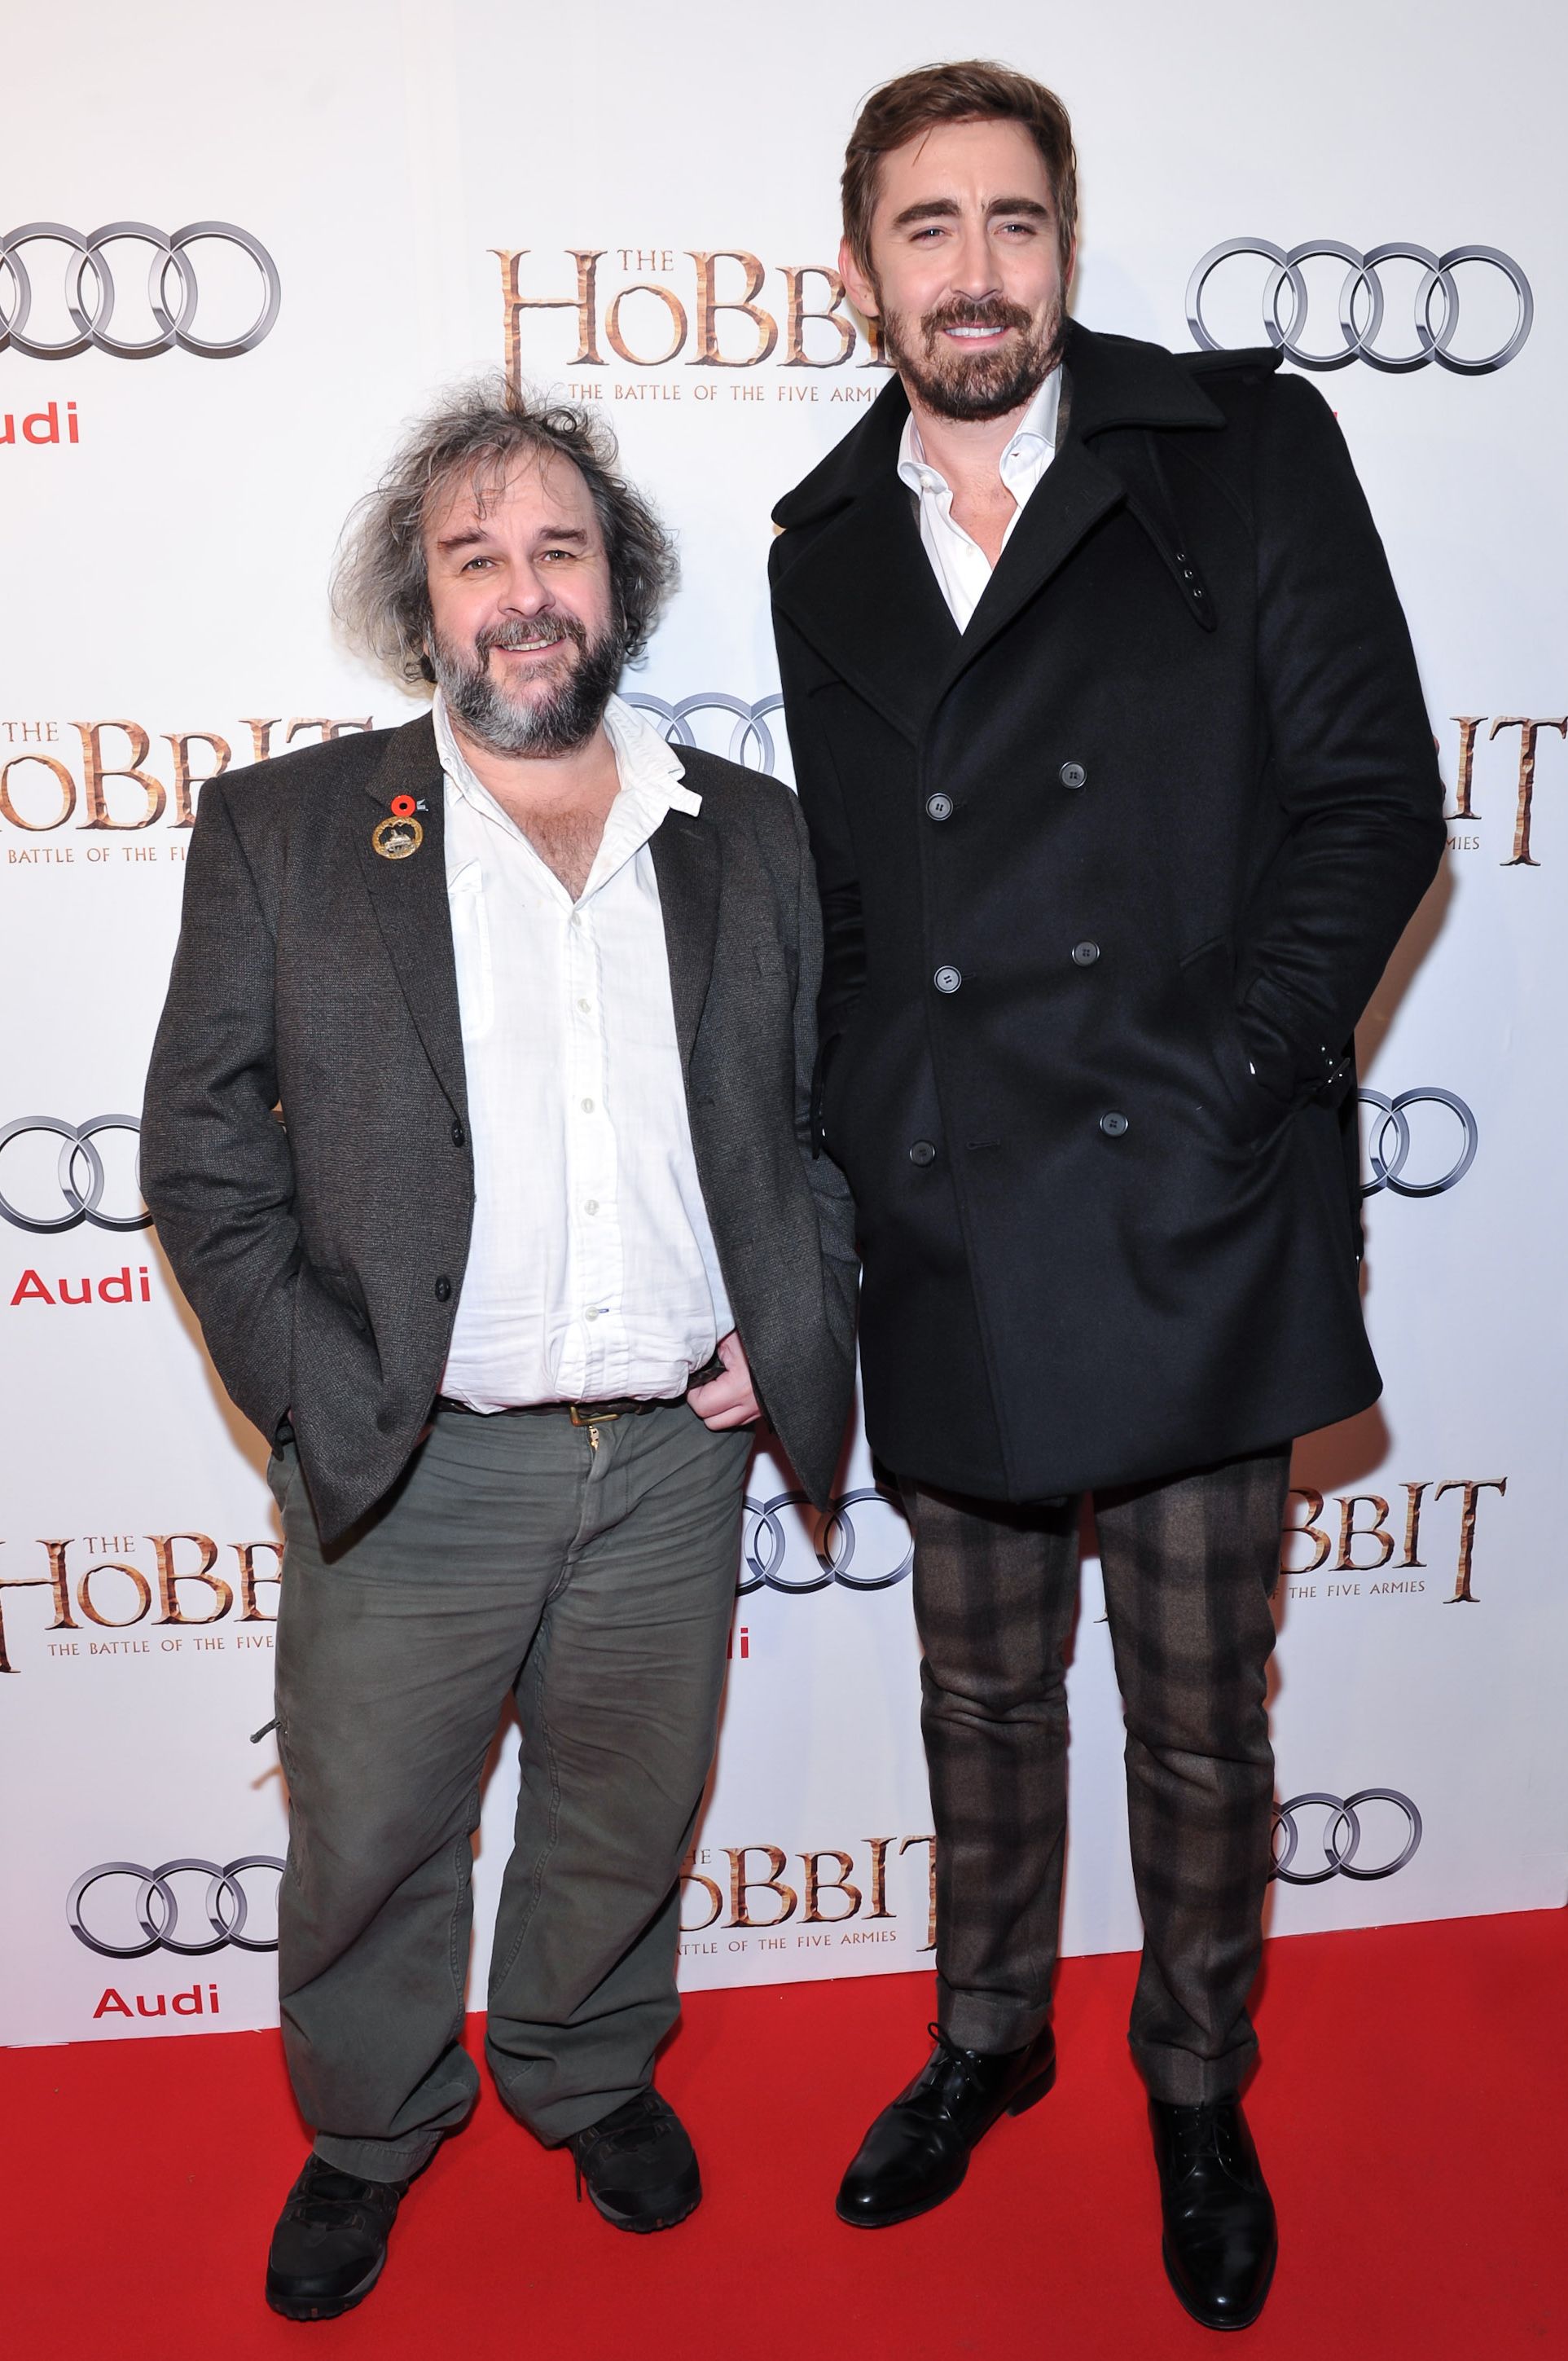 Peter Jackson and Lee Pace at The Hobbit: The Battle of the 